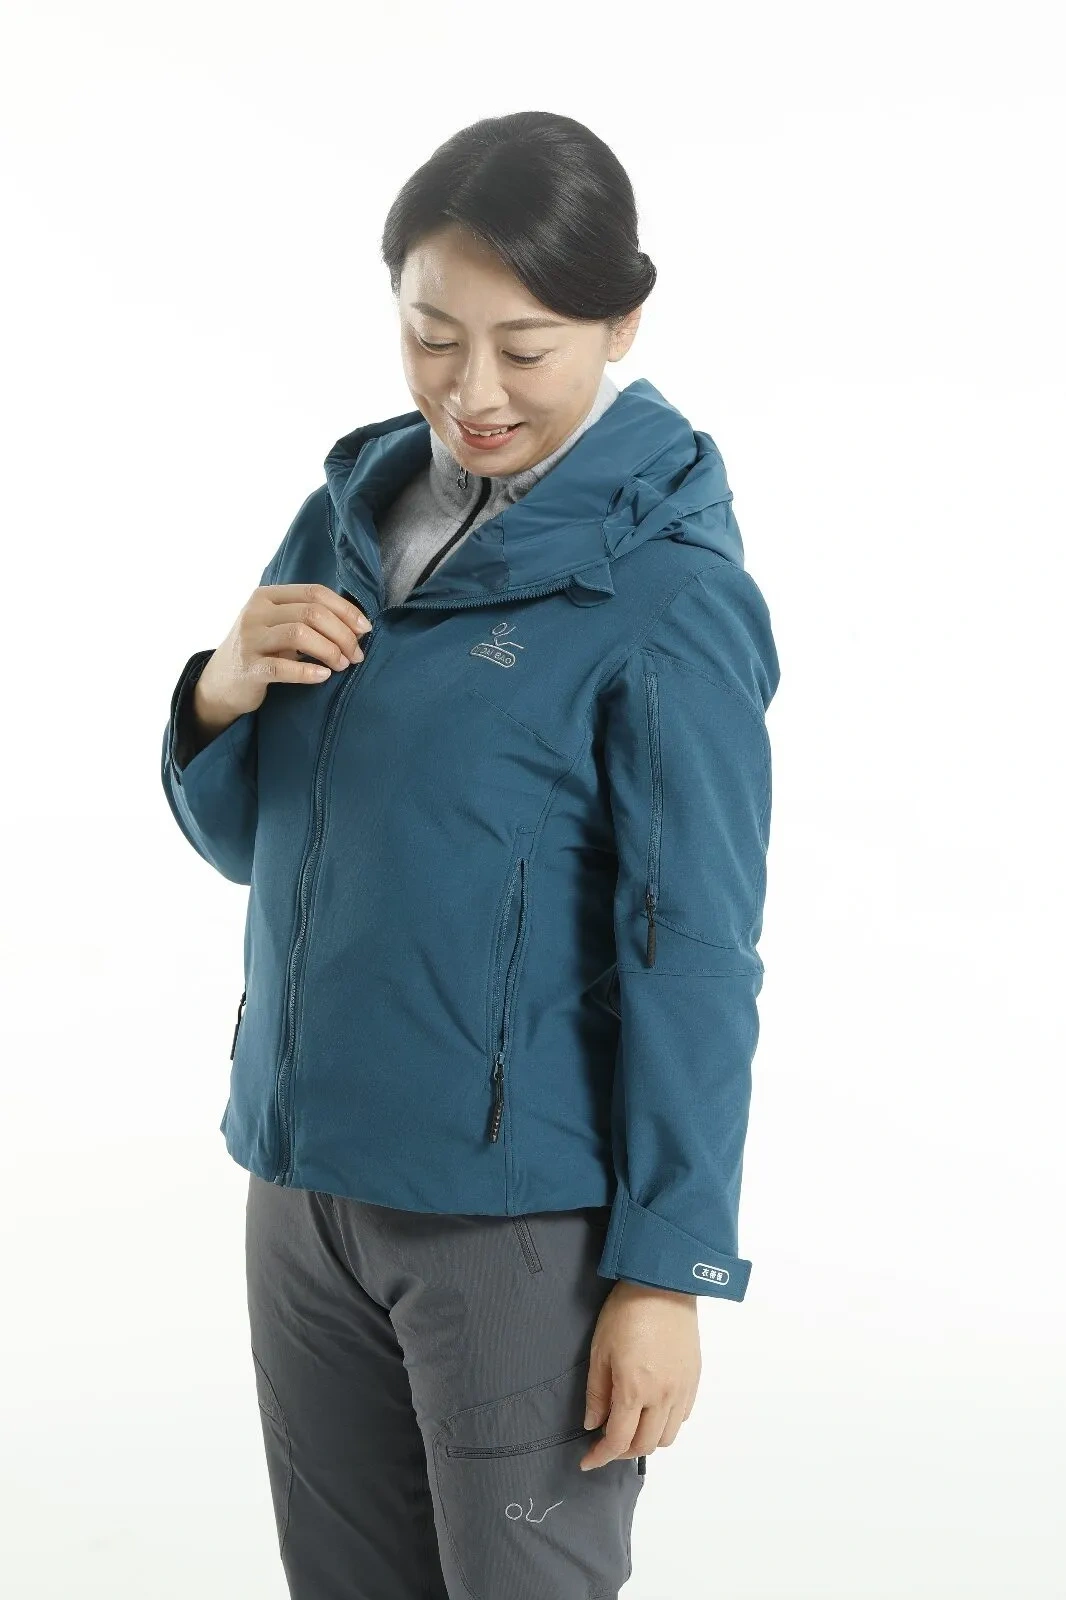 Wearable Antifall Airbag Vest to protect elderly from hip fracture  S AIRBAG Official Online Store